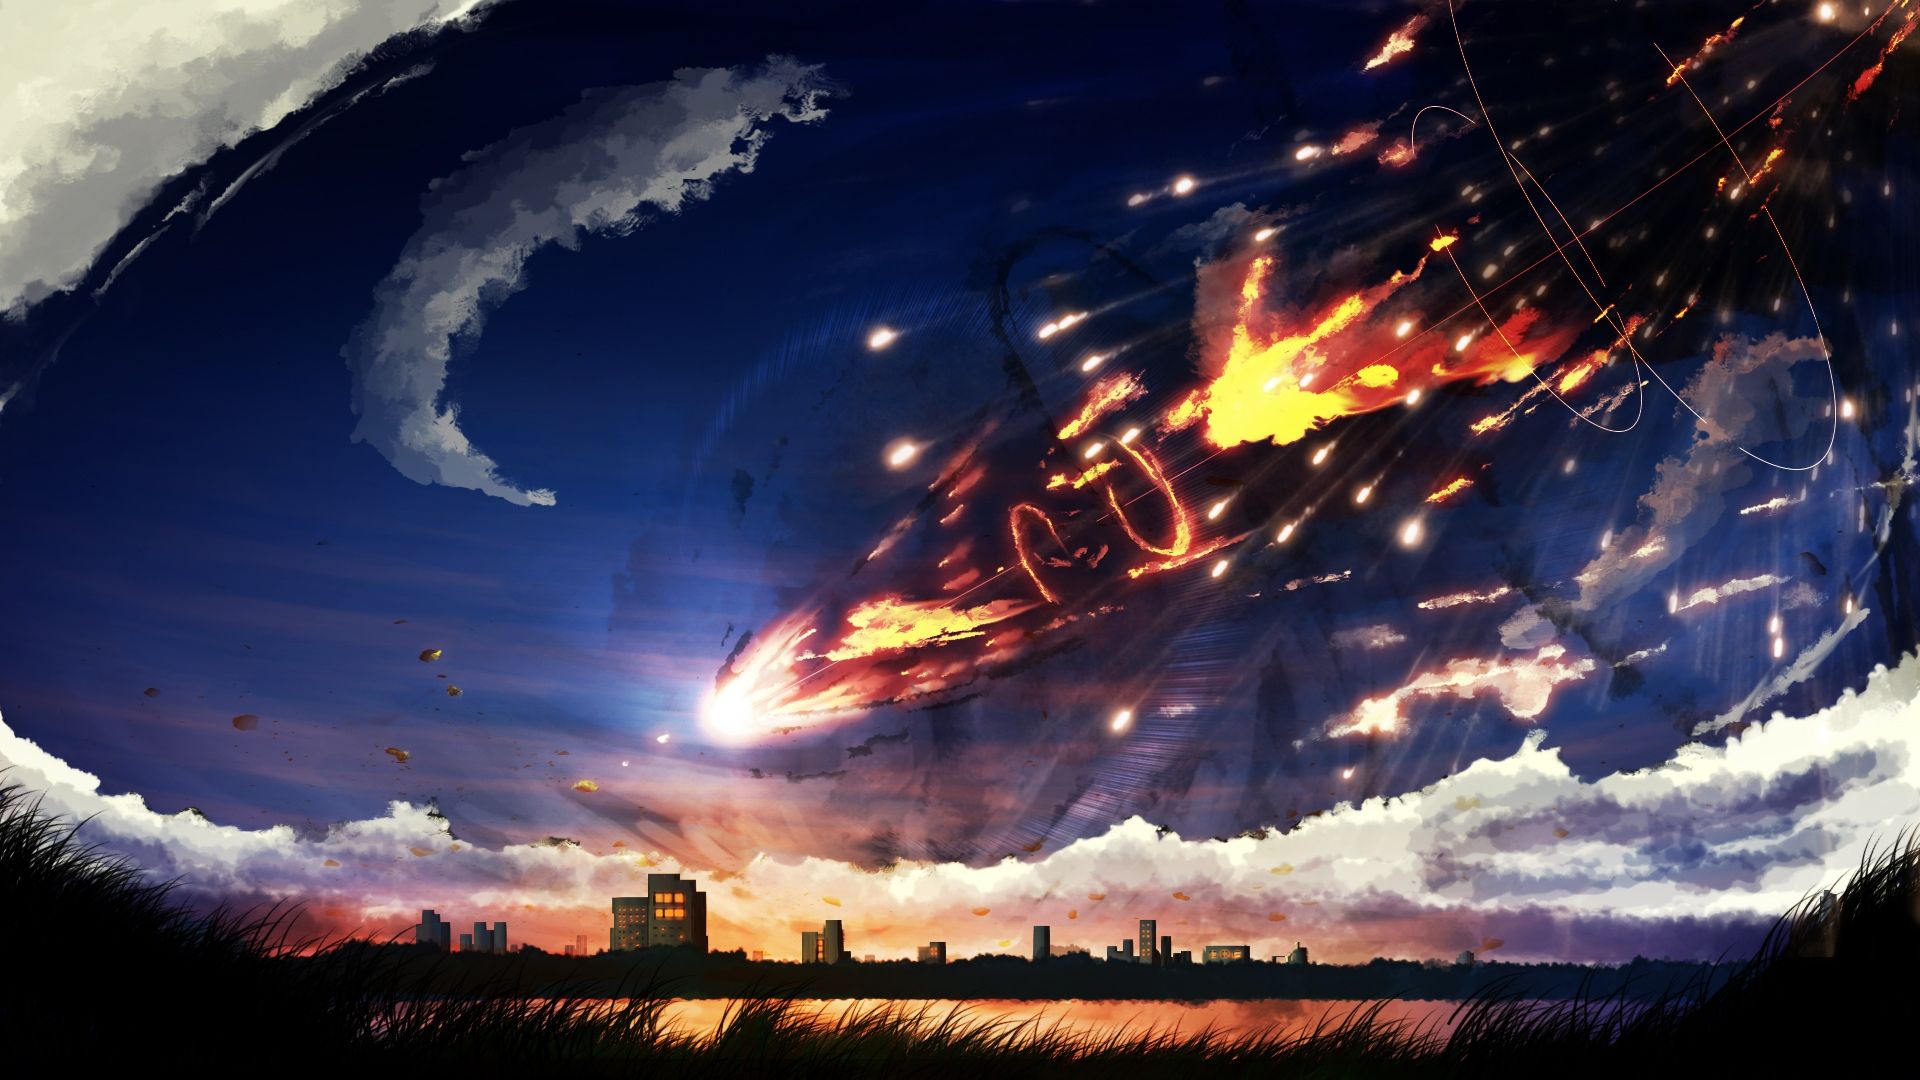 Download 1920x1080 Anime Landscape, Meteor, Clouds, Buildings, Sky Wallpaper for Widescreen